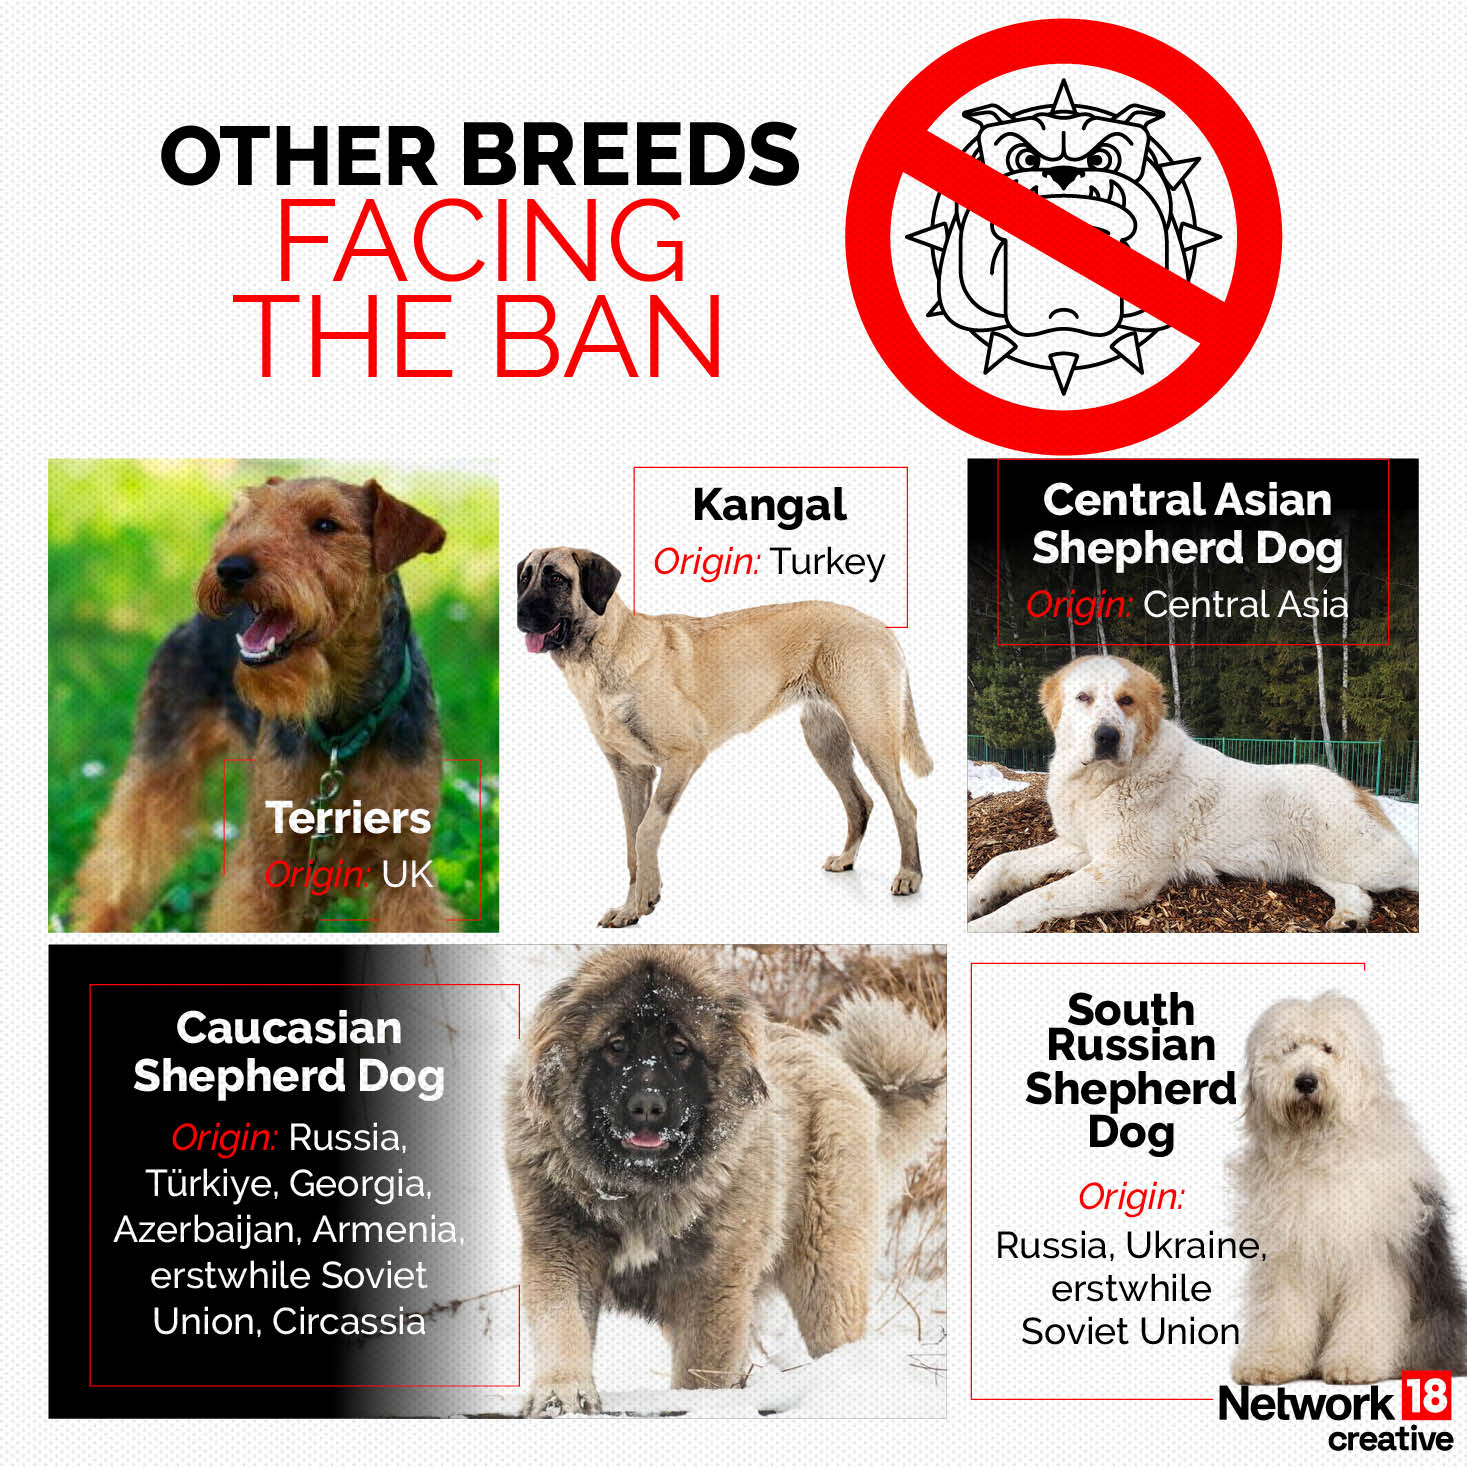 Ban 23 Ferocious Dog Breeds: Centre's Directive to States Amid Pet